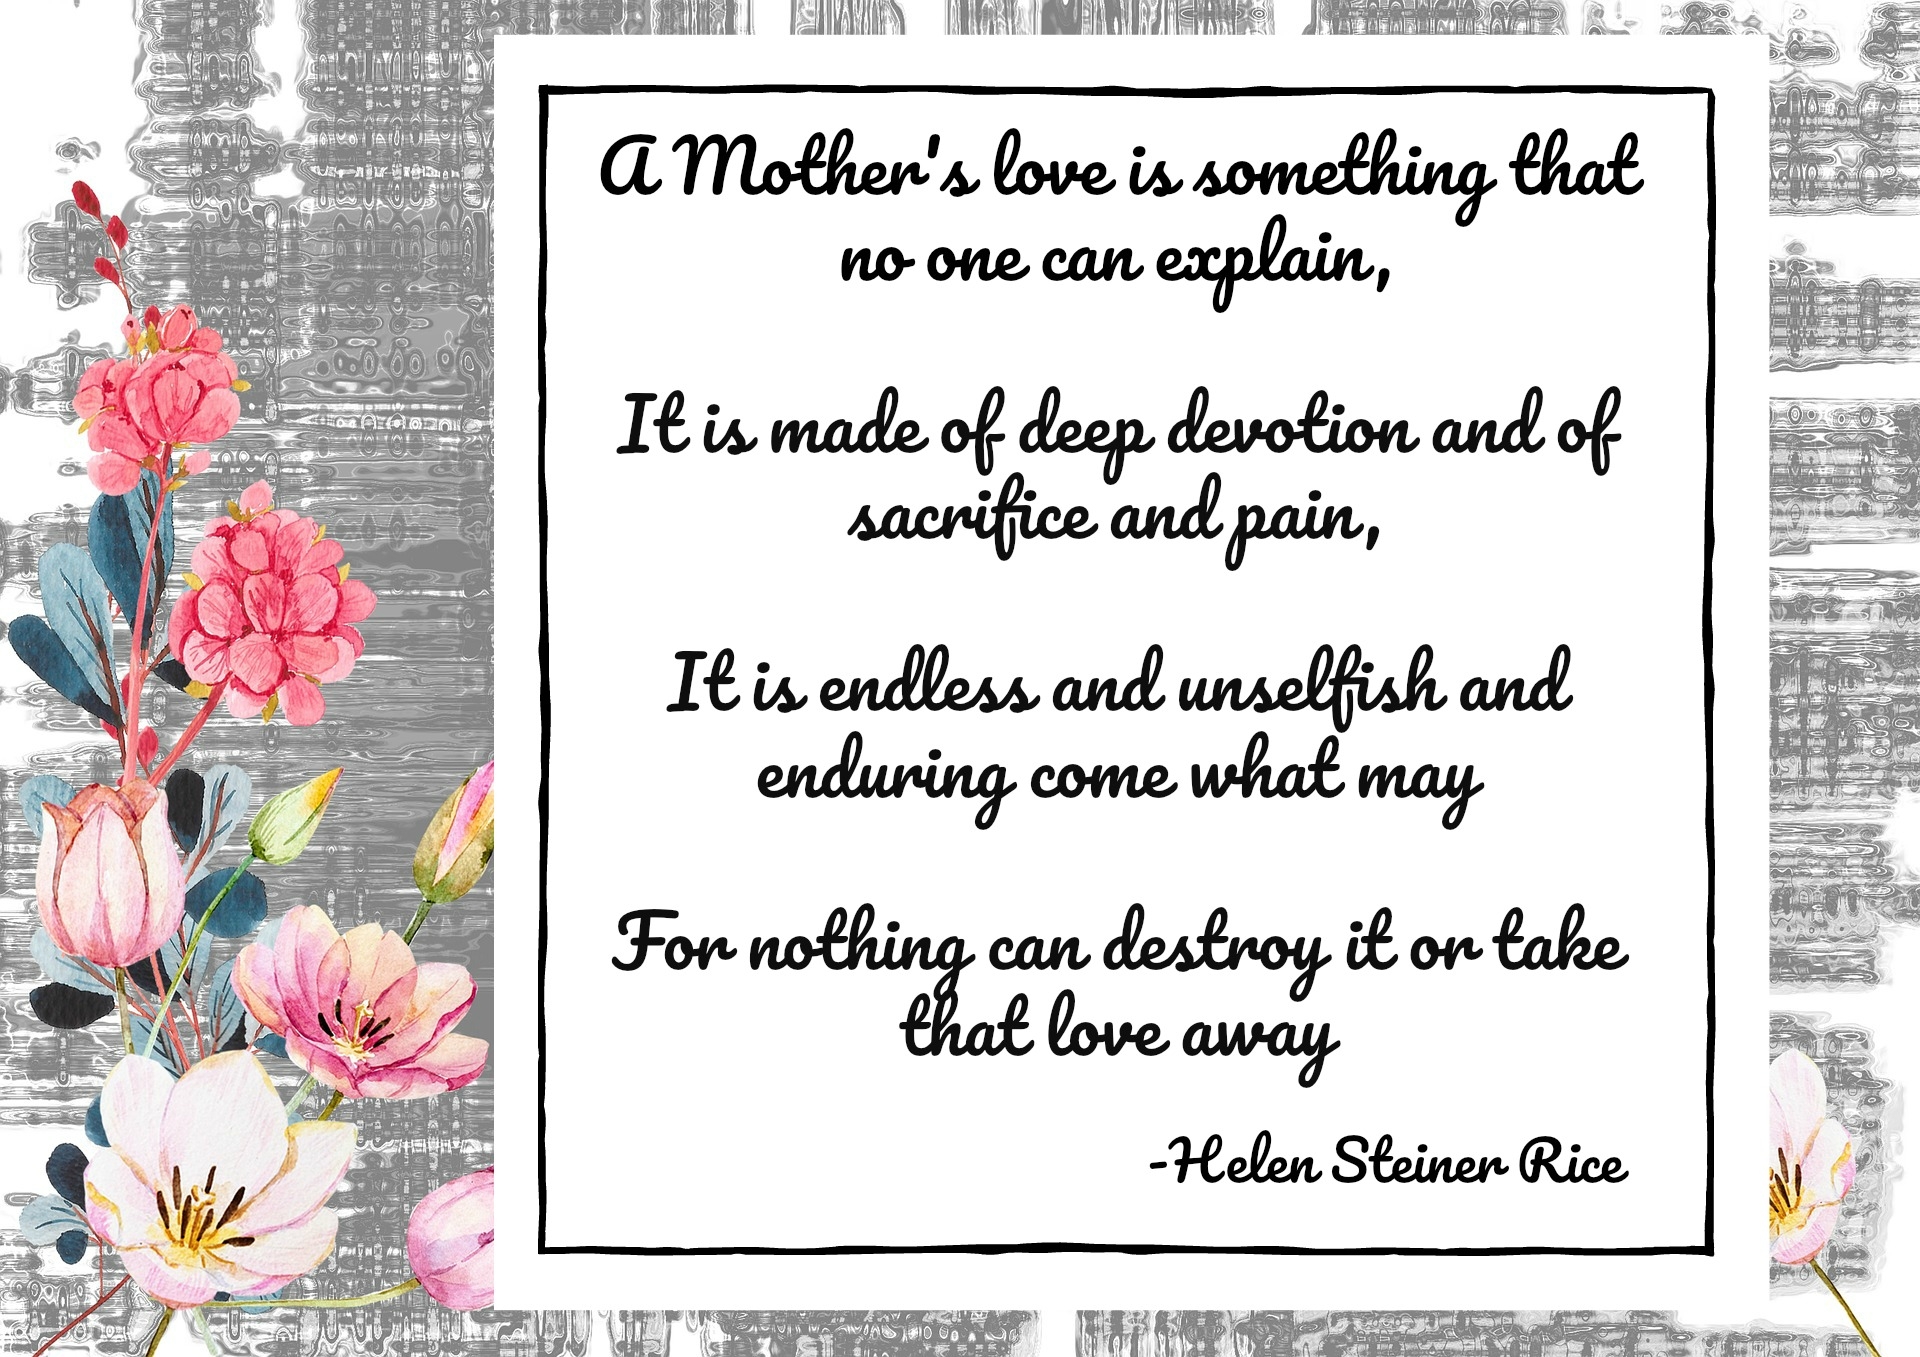 A Mother s Love Poem By Helen Steiner Rice Melanie s Library